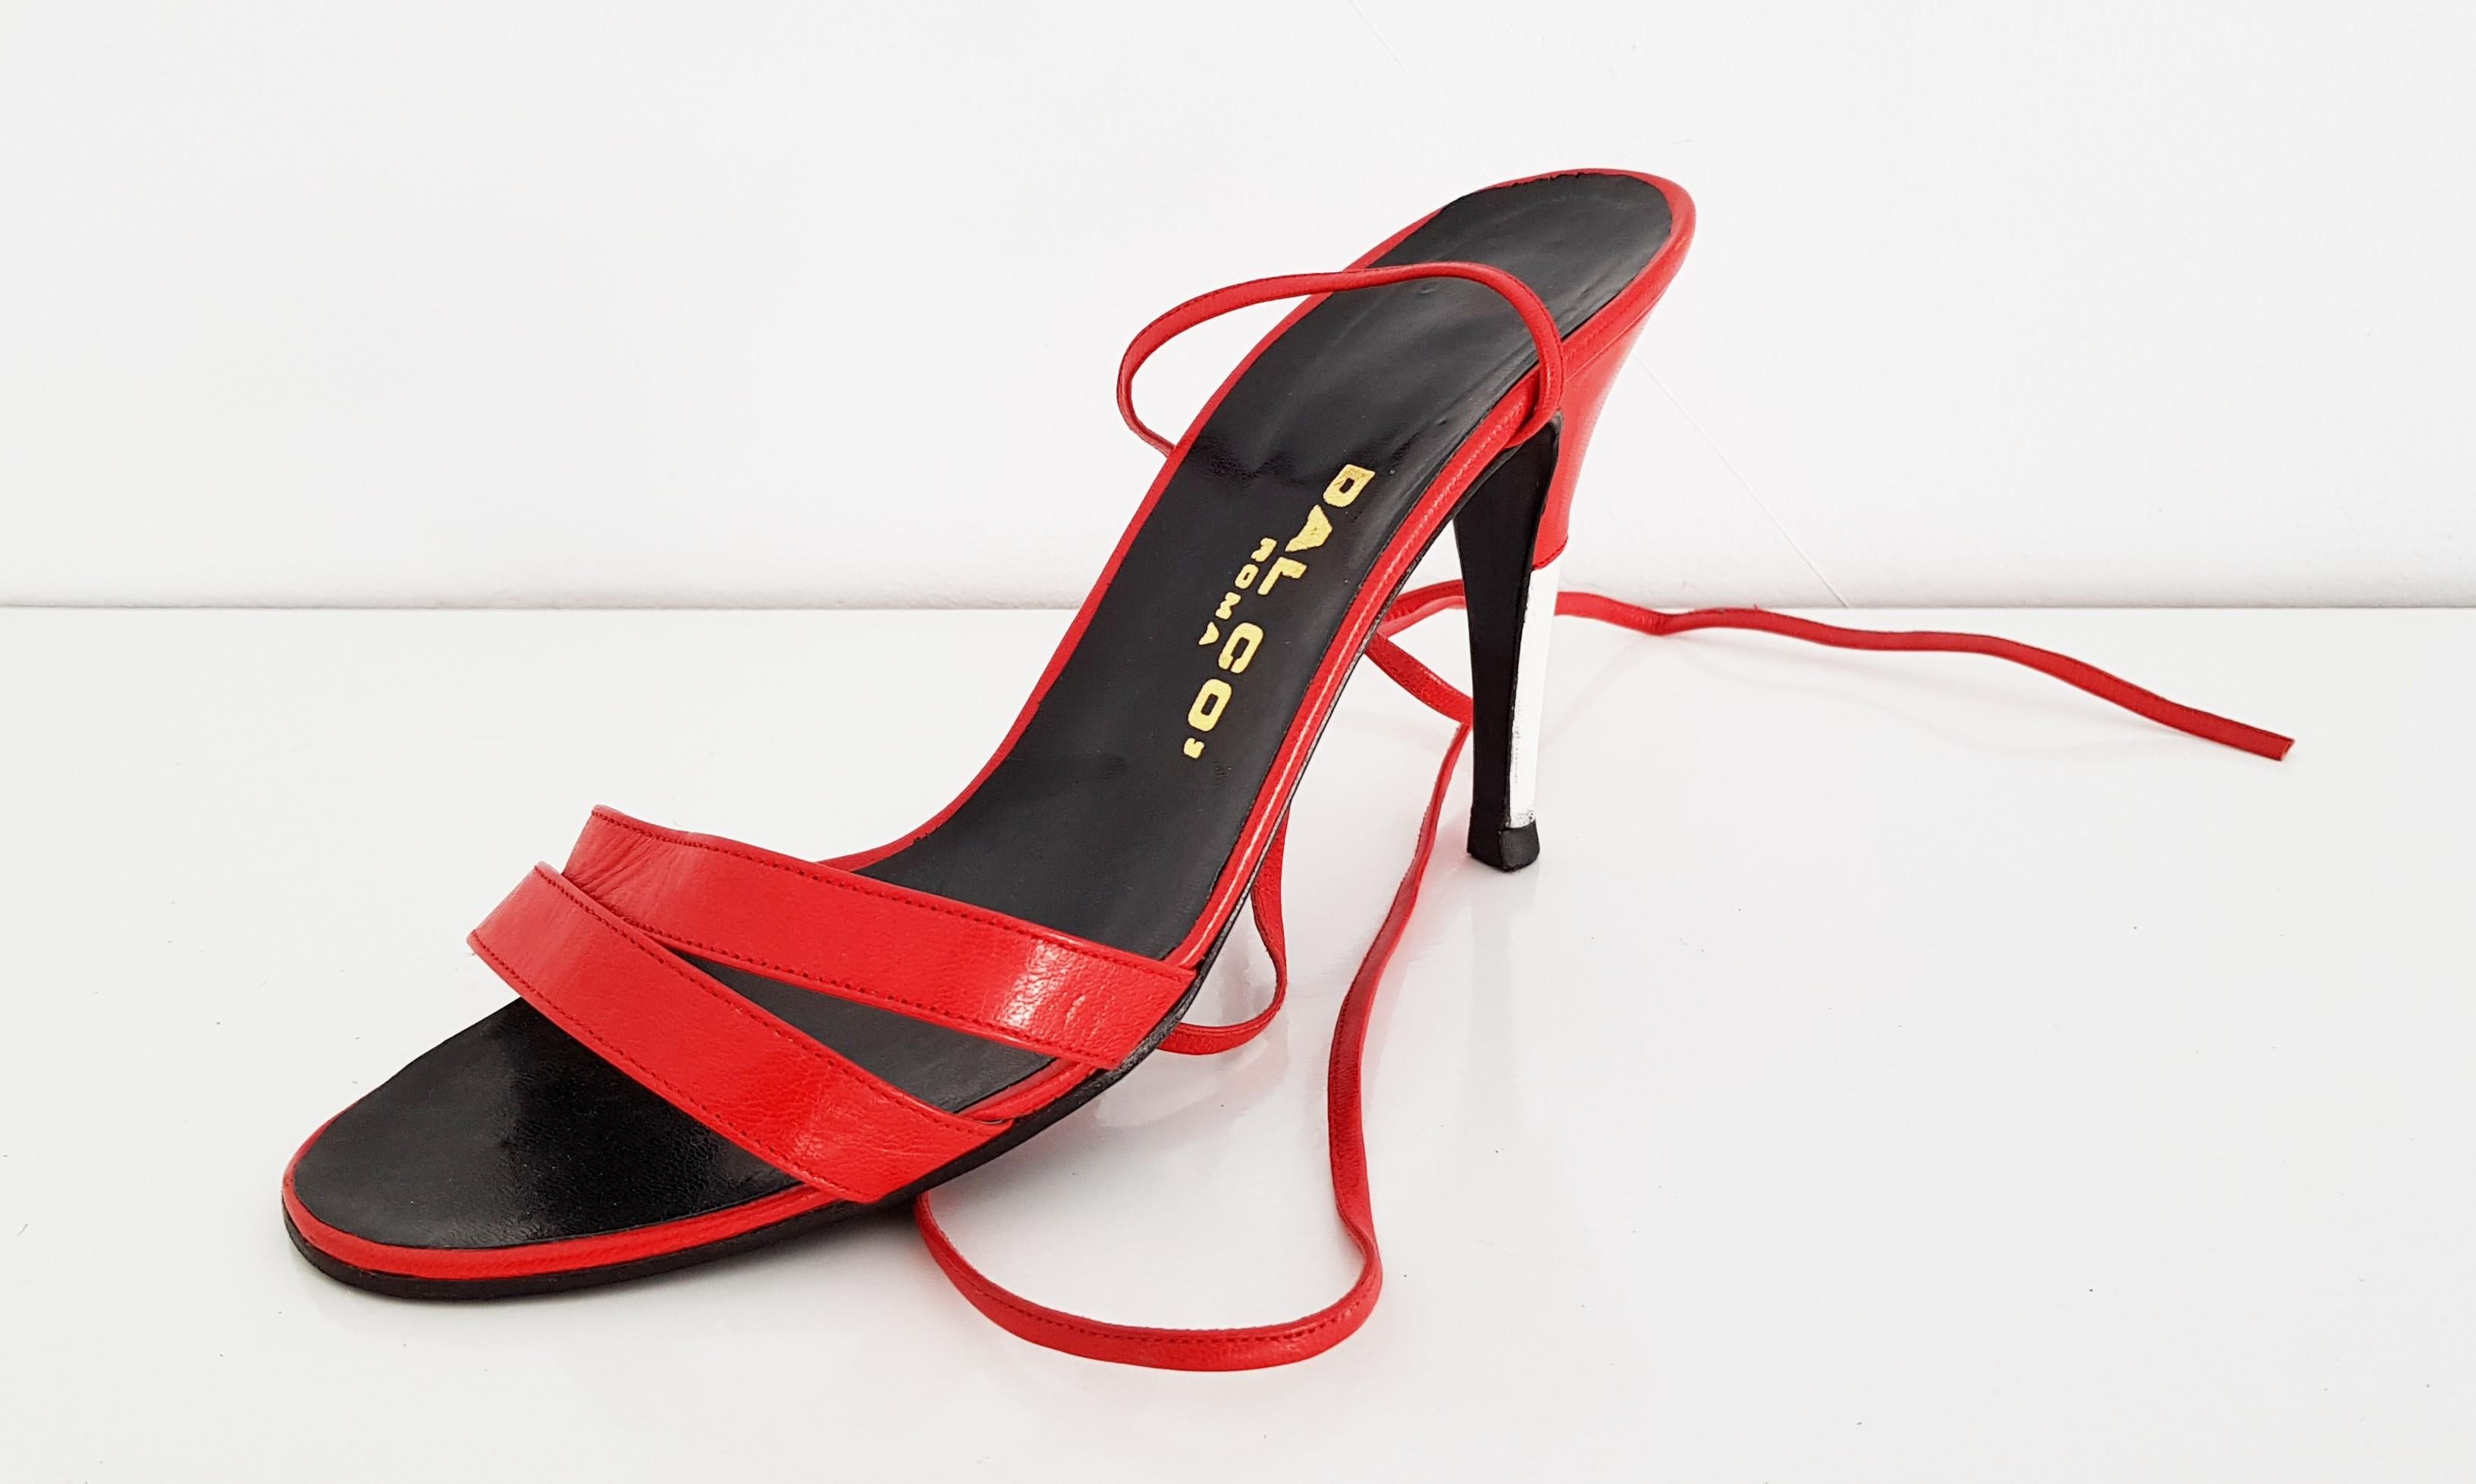 Dal Co' x Valentino Red and White Open Leather Heels with Laces
Size: 39 1/2
Length: 22 cm
Width: 8.5 cm
Heels height: 10 cm
Laces length: 65 cm
Made in Italy